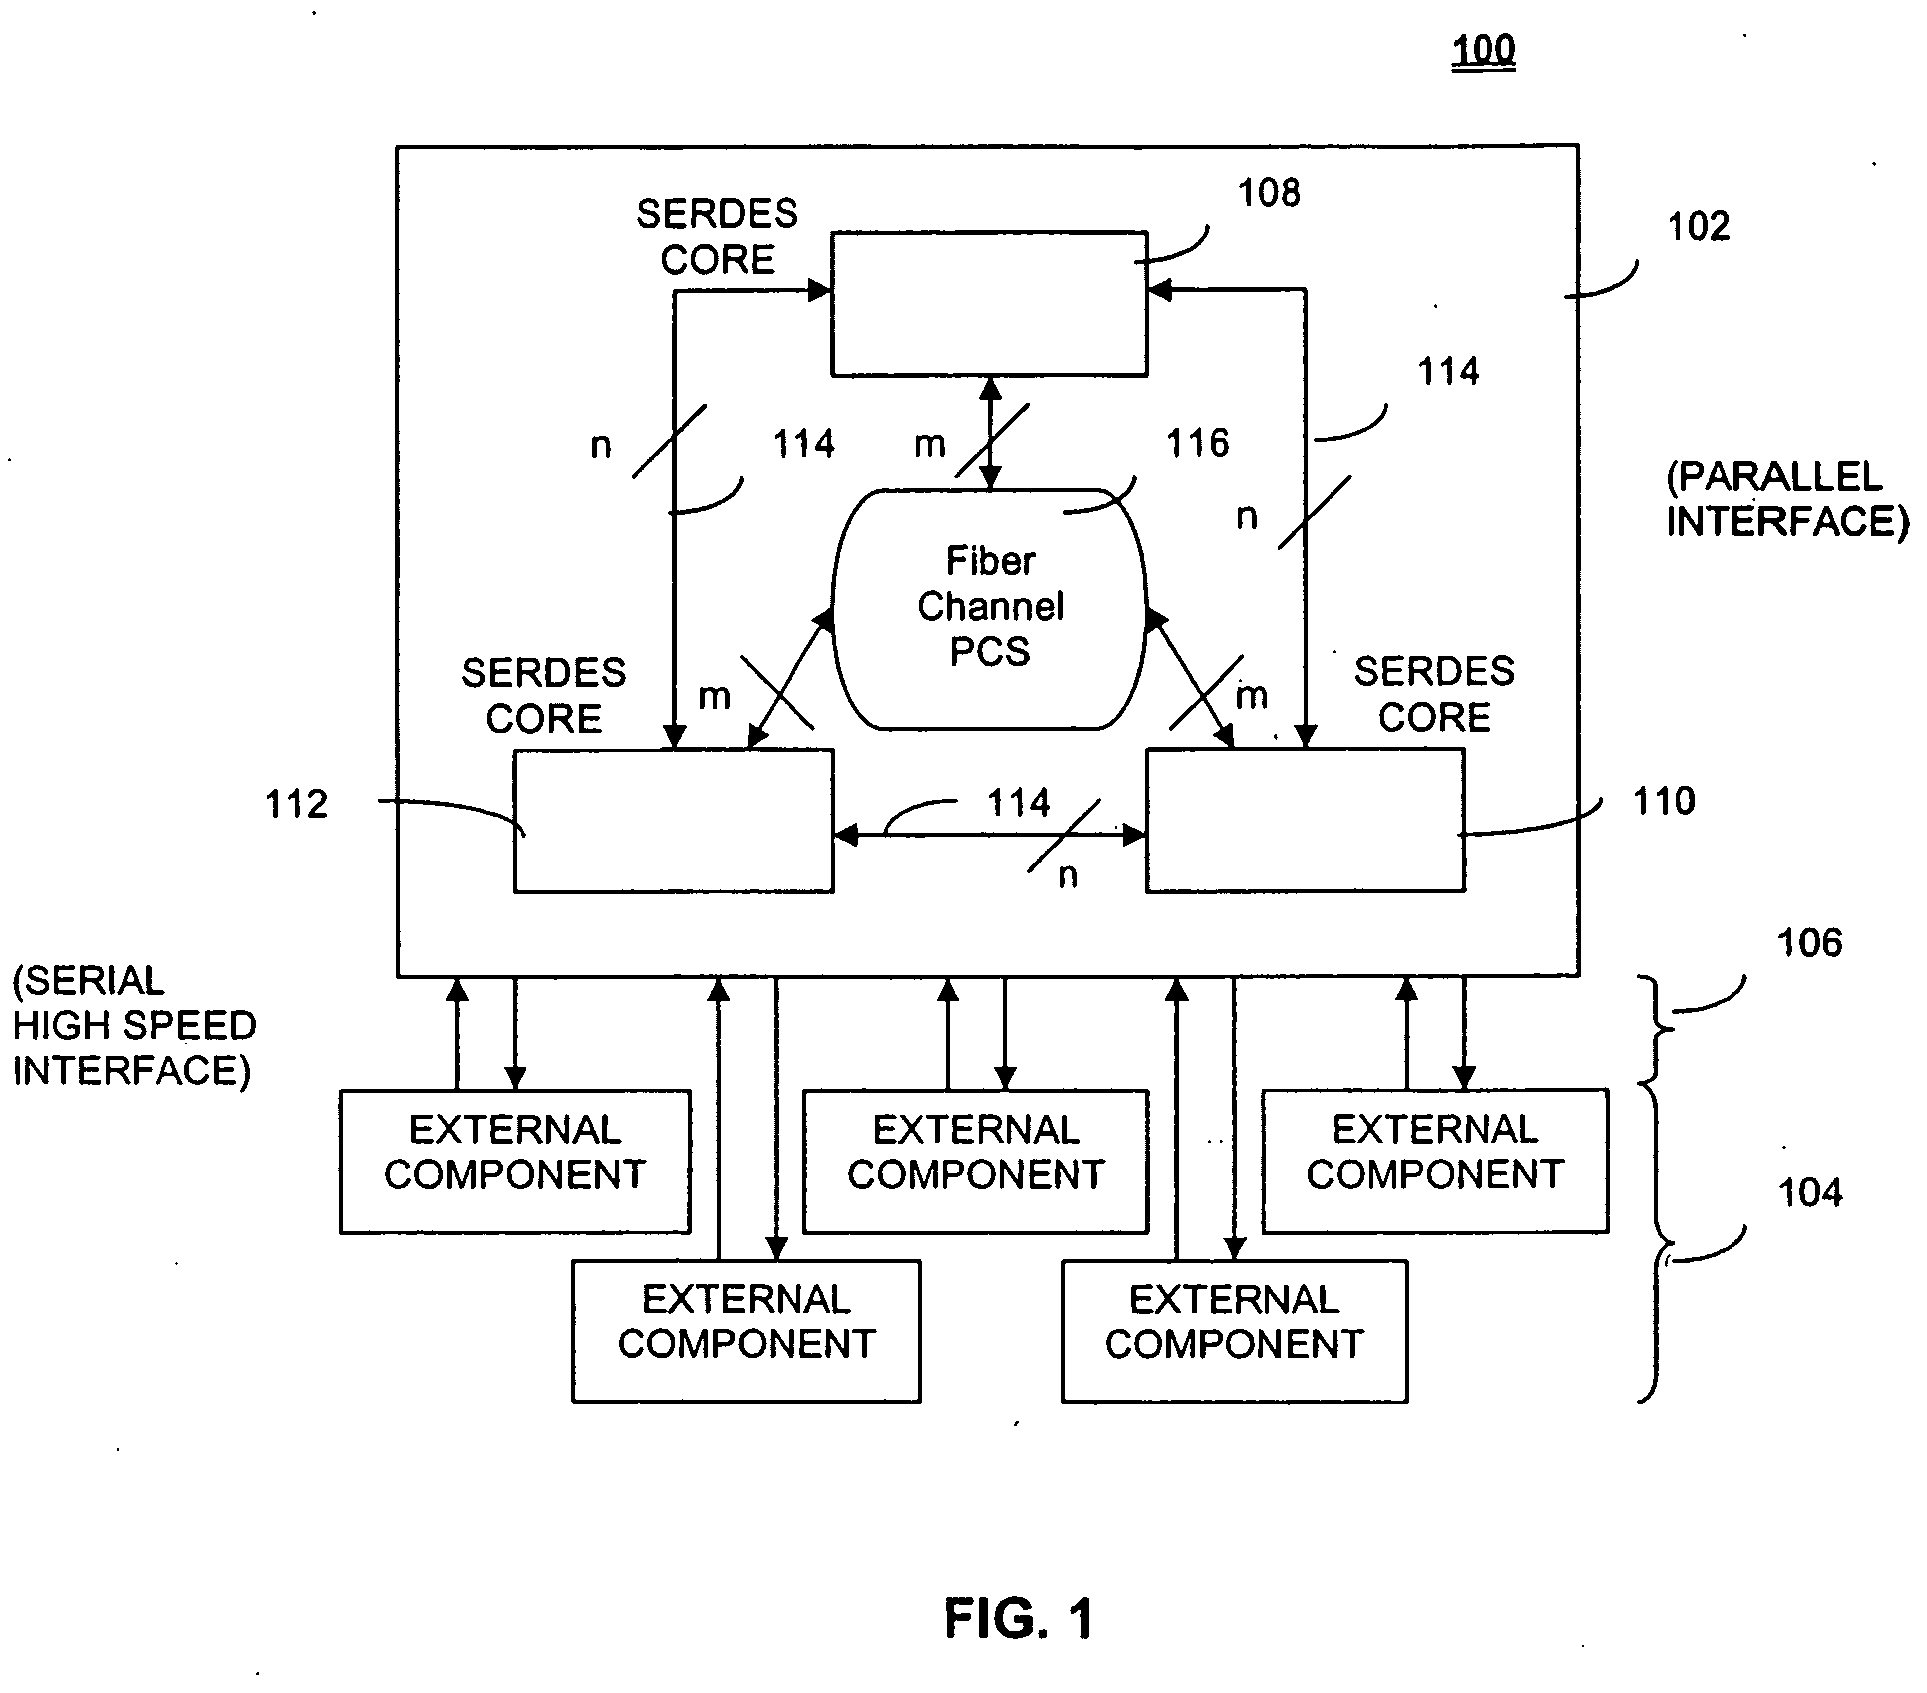 System and method of phase-locking a transmit clock signal phase with a receive clock signal phase